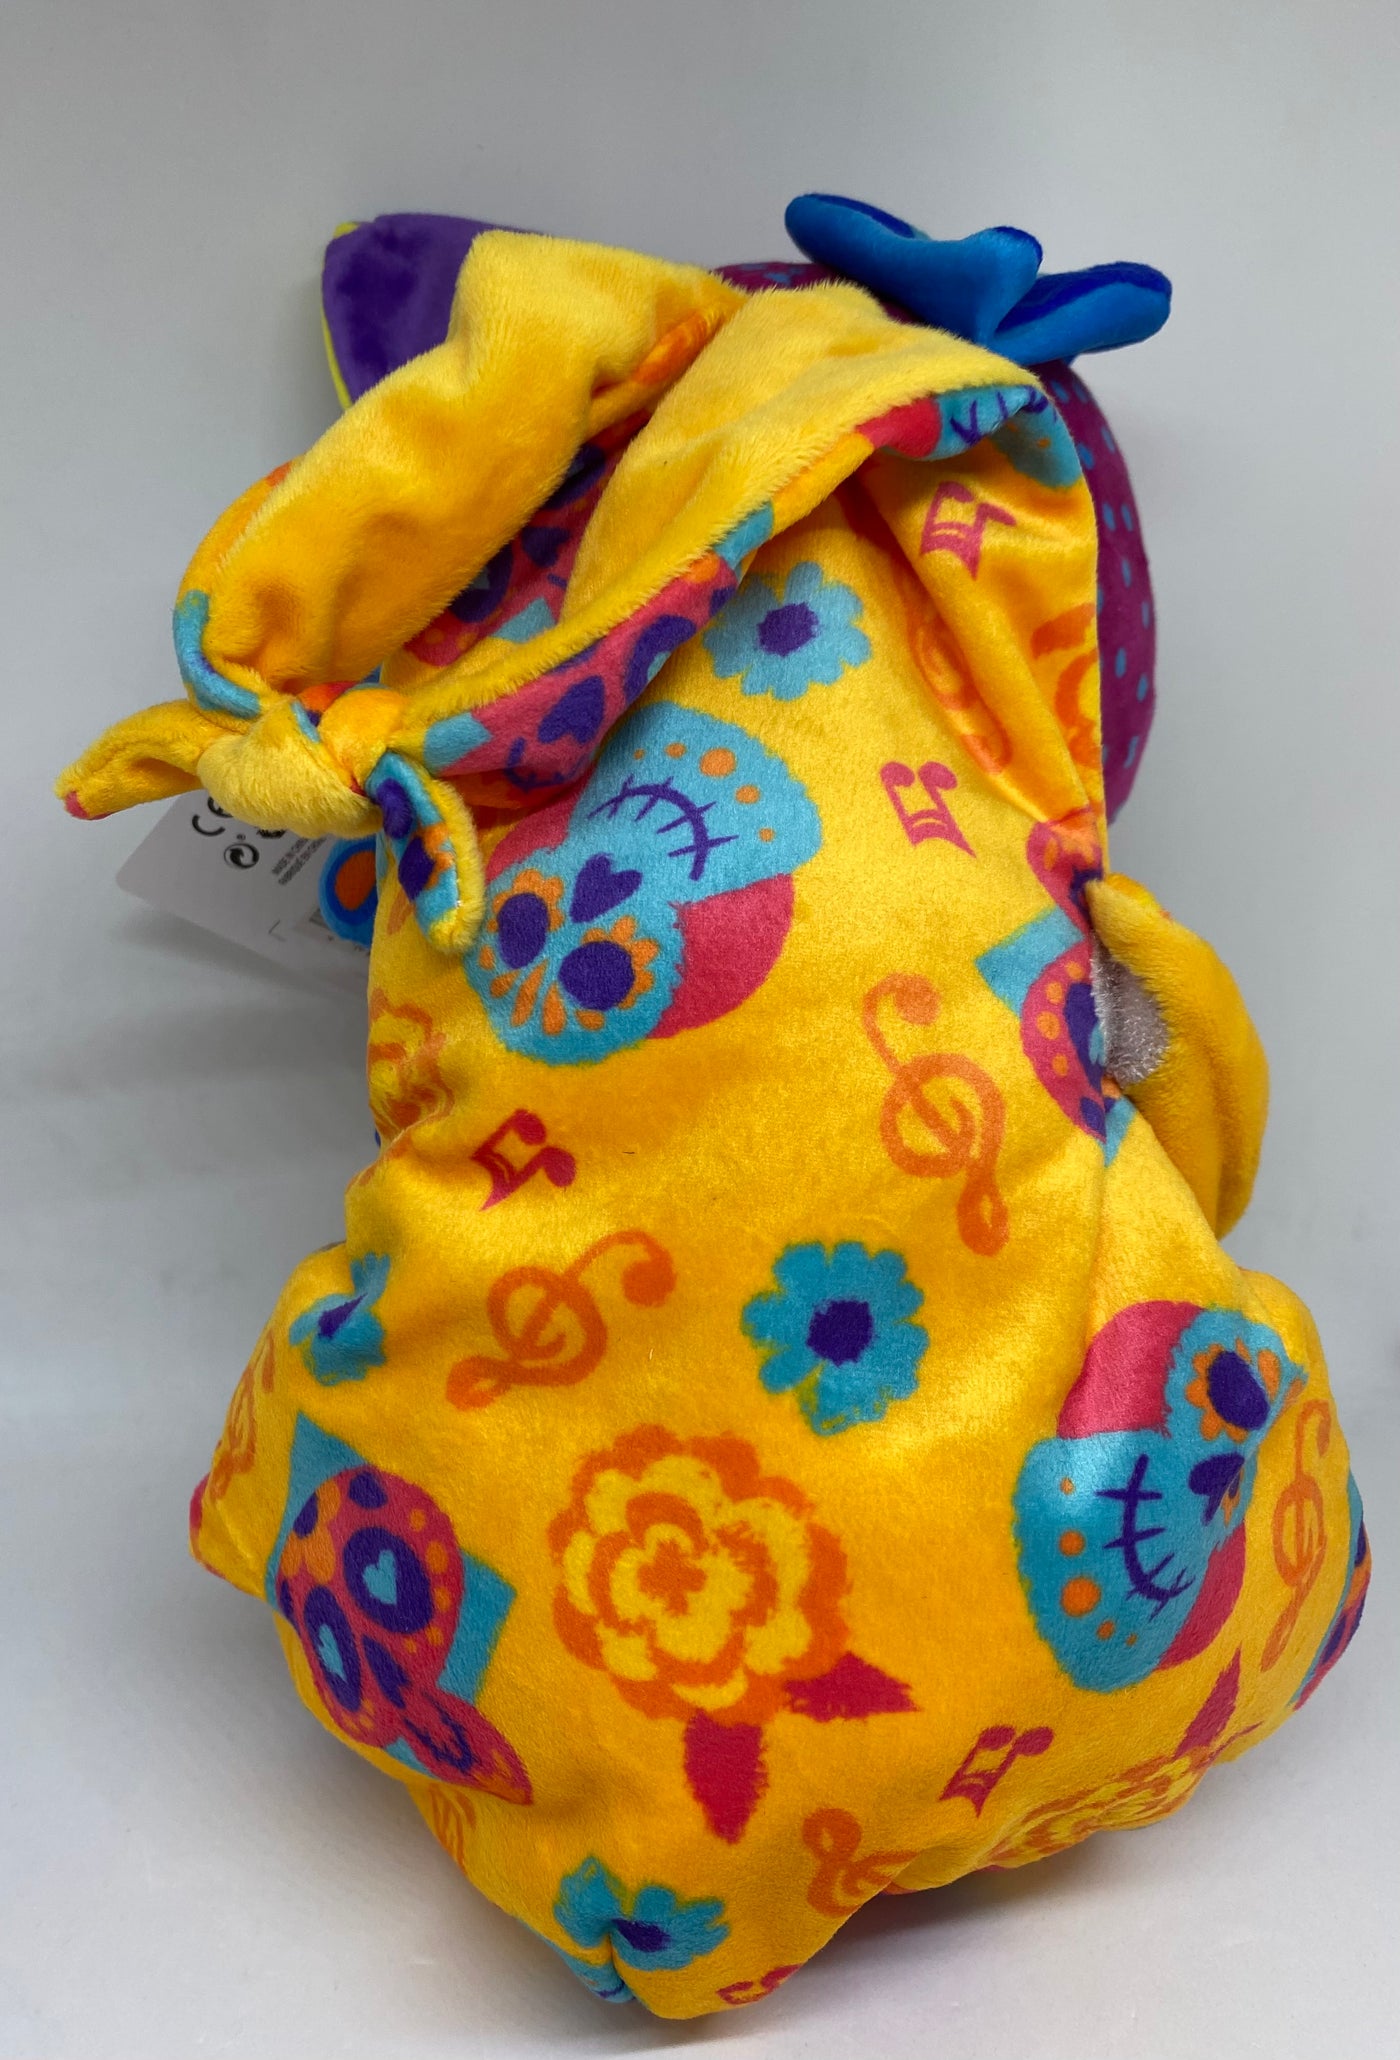 Disney Parks Coco Baby Dante in Blanket Pouch Plush New with Tags